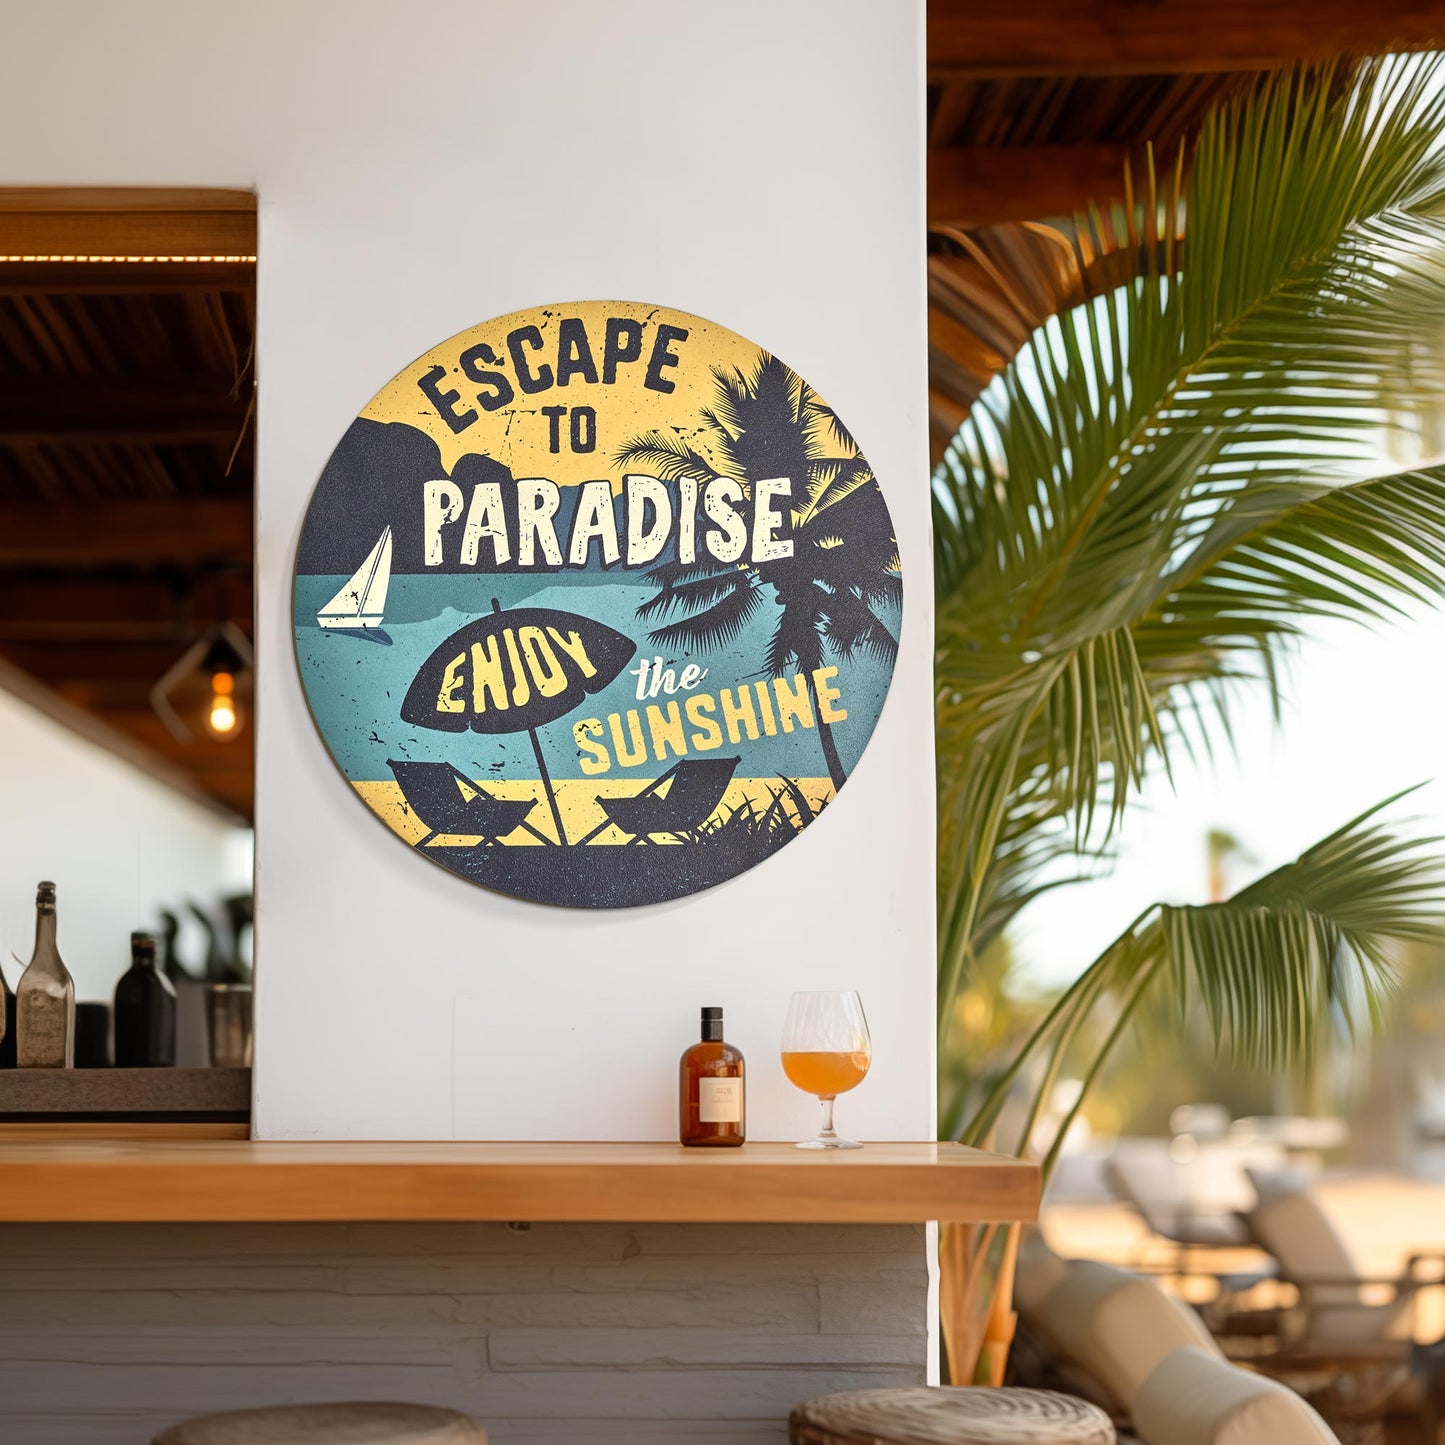 Escape to Paradise Round MDF Wall Plaque - 20" x 20" x 0.35"